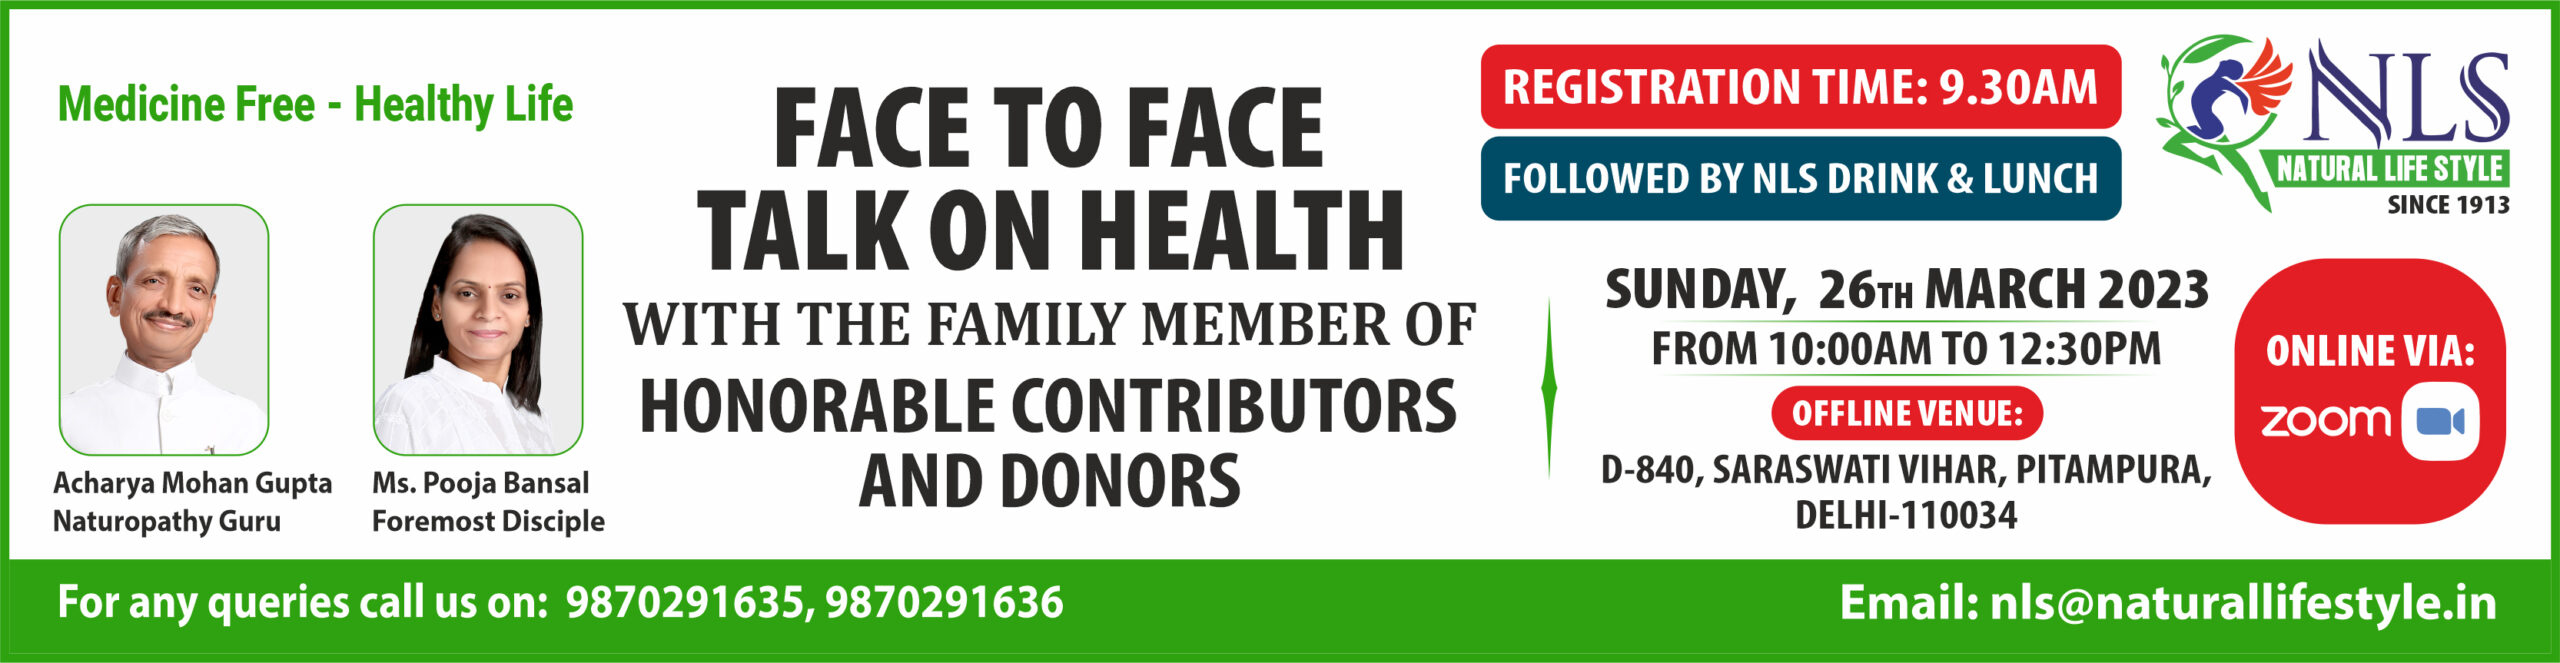 FACE TO FACE TALK ON HEALTH WITH THE FAMILT MEMBER OF HONORABLE CONTRIBUTORS AND DONORS